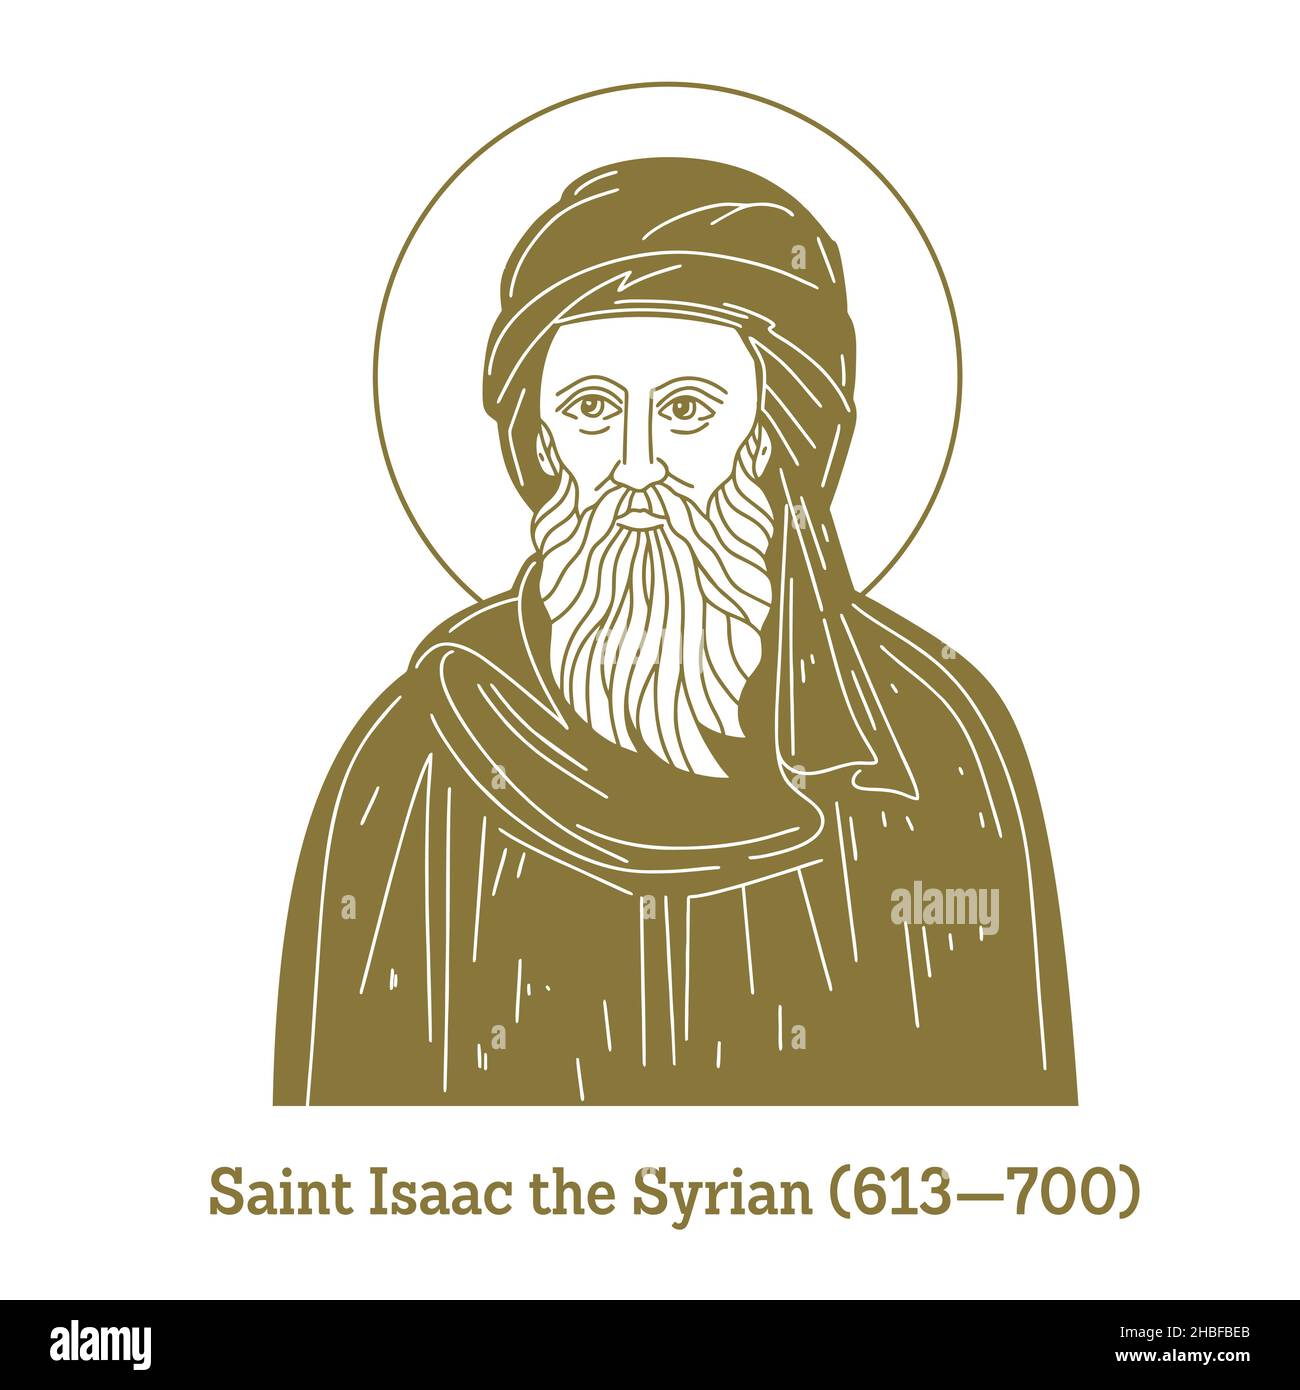 Saint Isaac the Syrian (613-700) was a 7th-century Church of the East Syriac Christian bishop and theologian best remembered for his written works Stock Vector